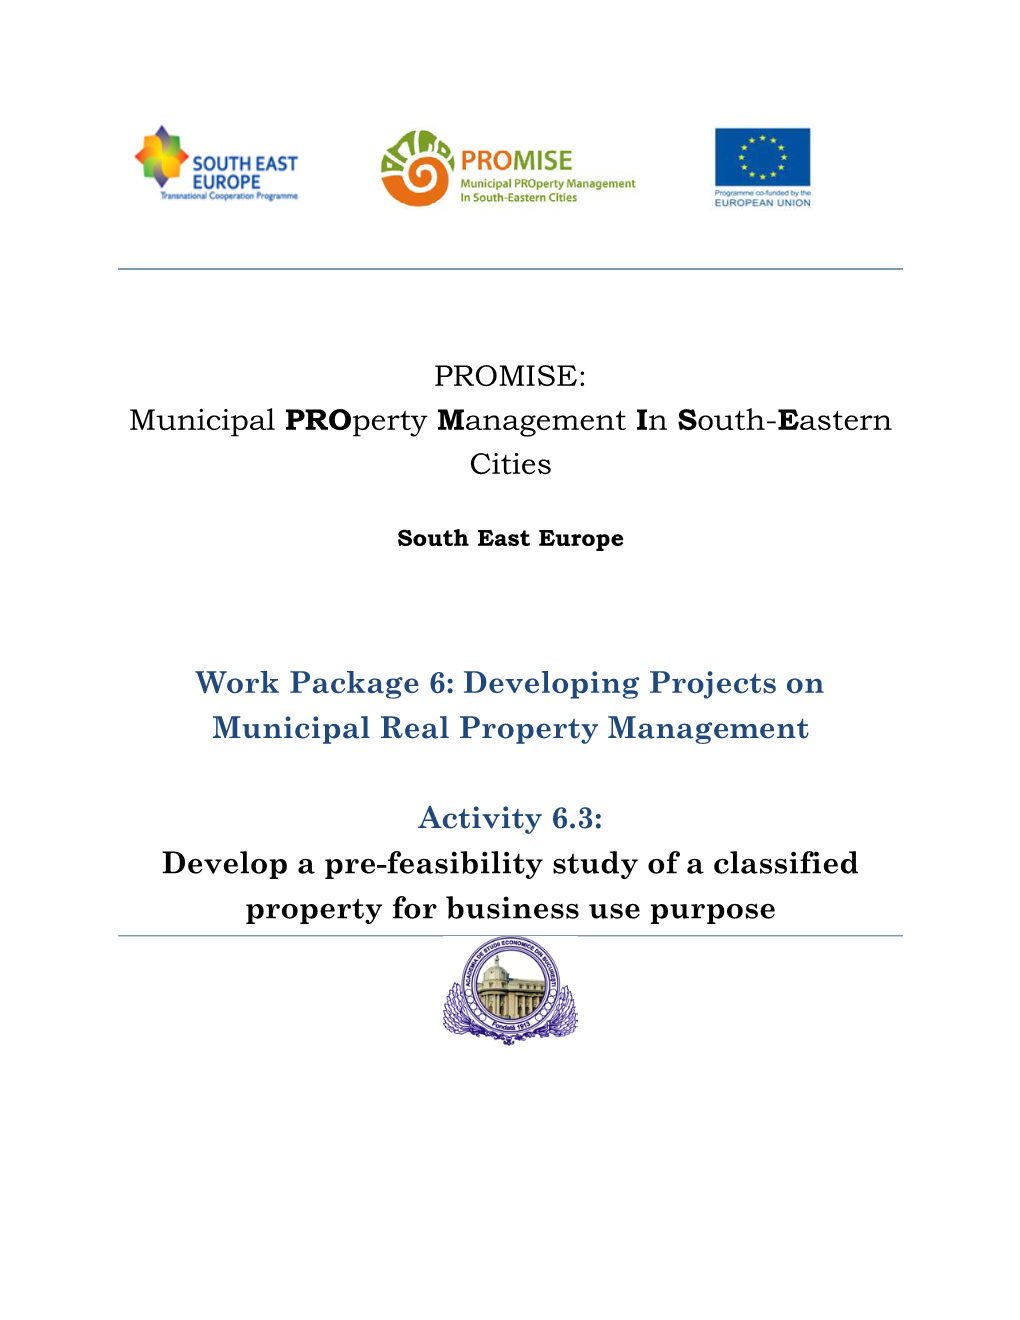 Pre-Feasibility Study for Using Municipal Property for Business